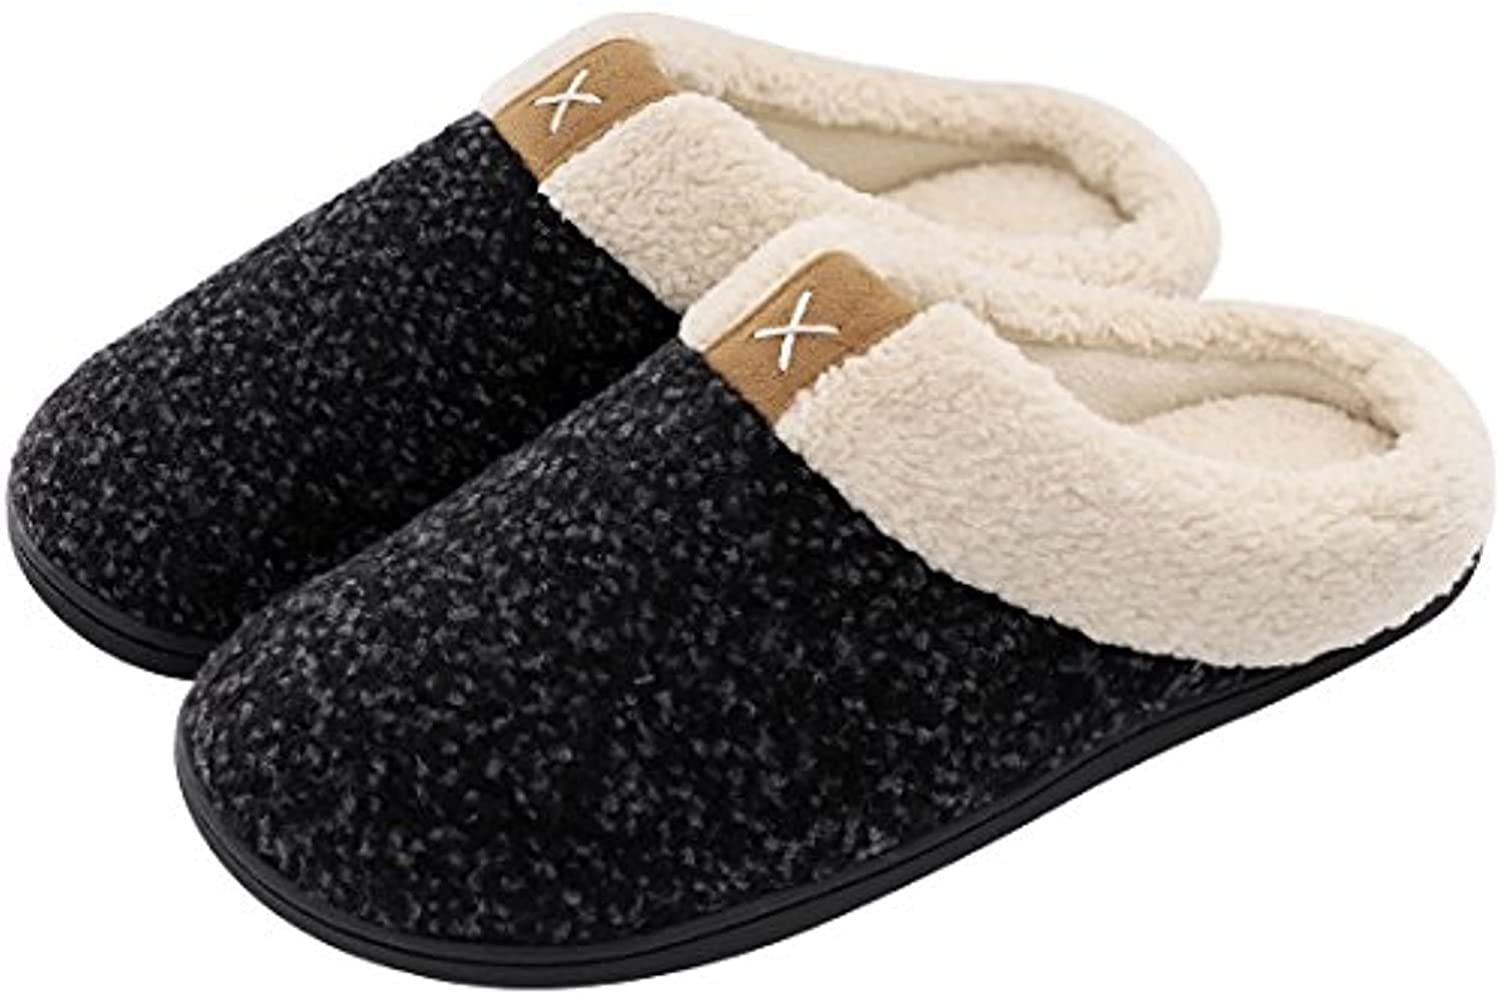 Comfy Memory Foam Anti-Slip House Shoes VeraCosy Mens Ribbed Hand-Knit Collar Slippers 